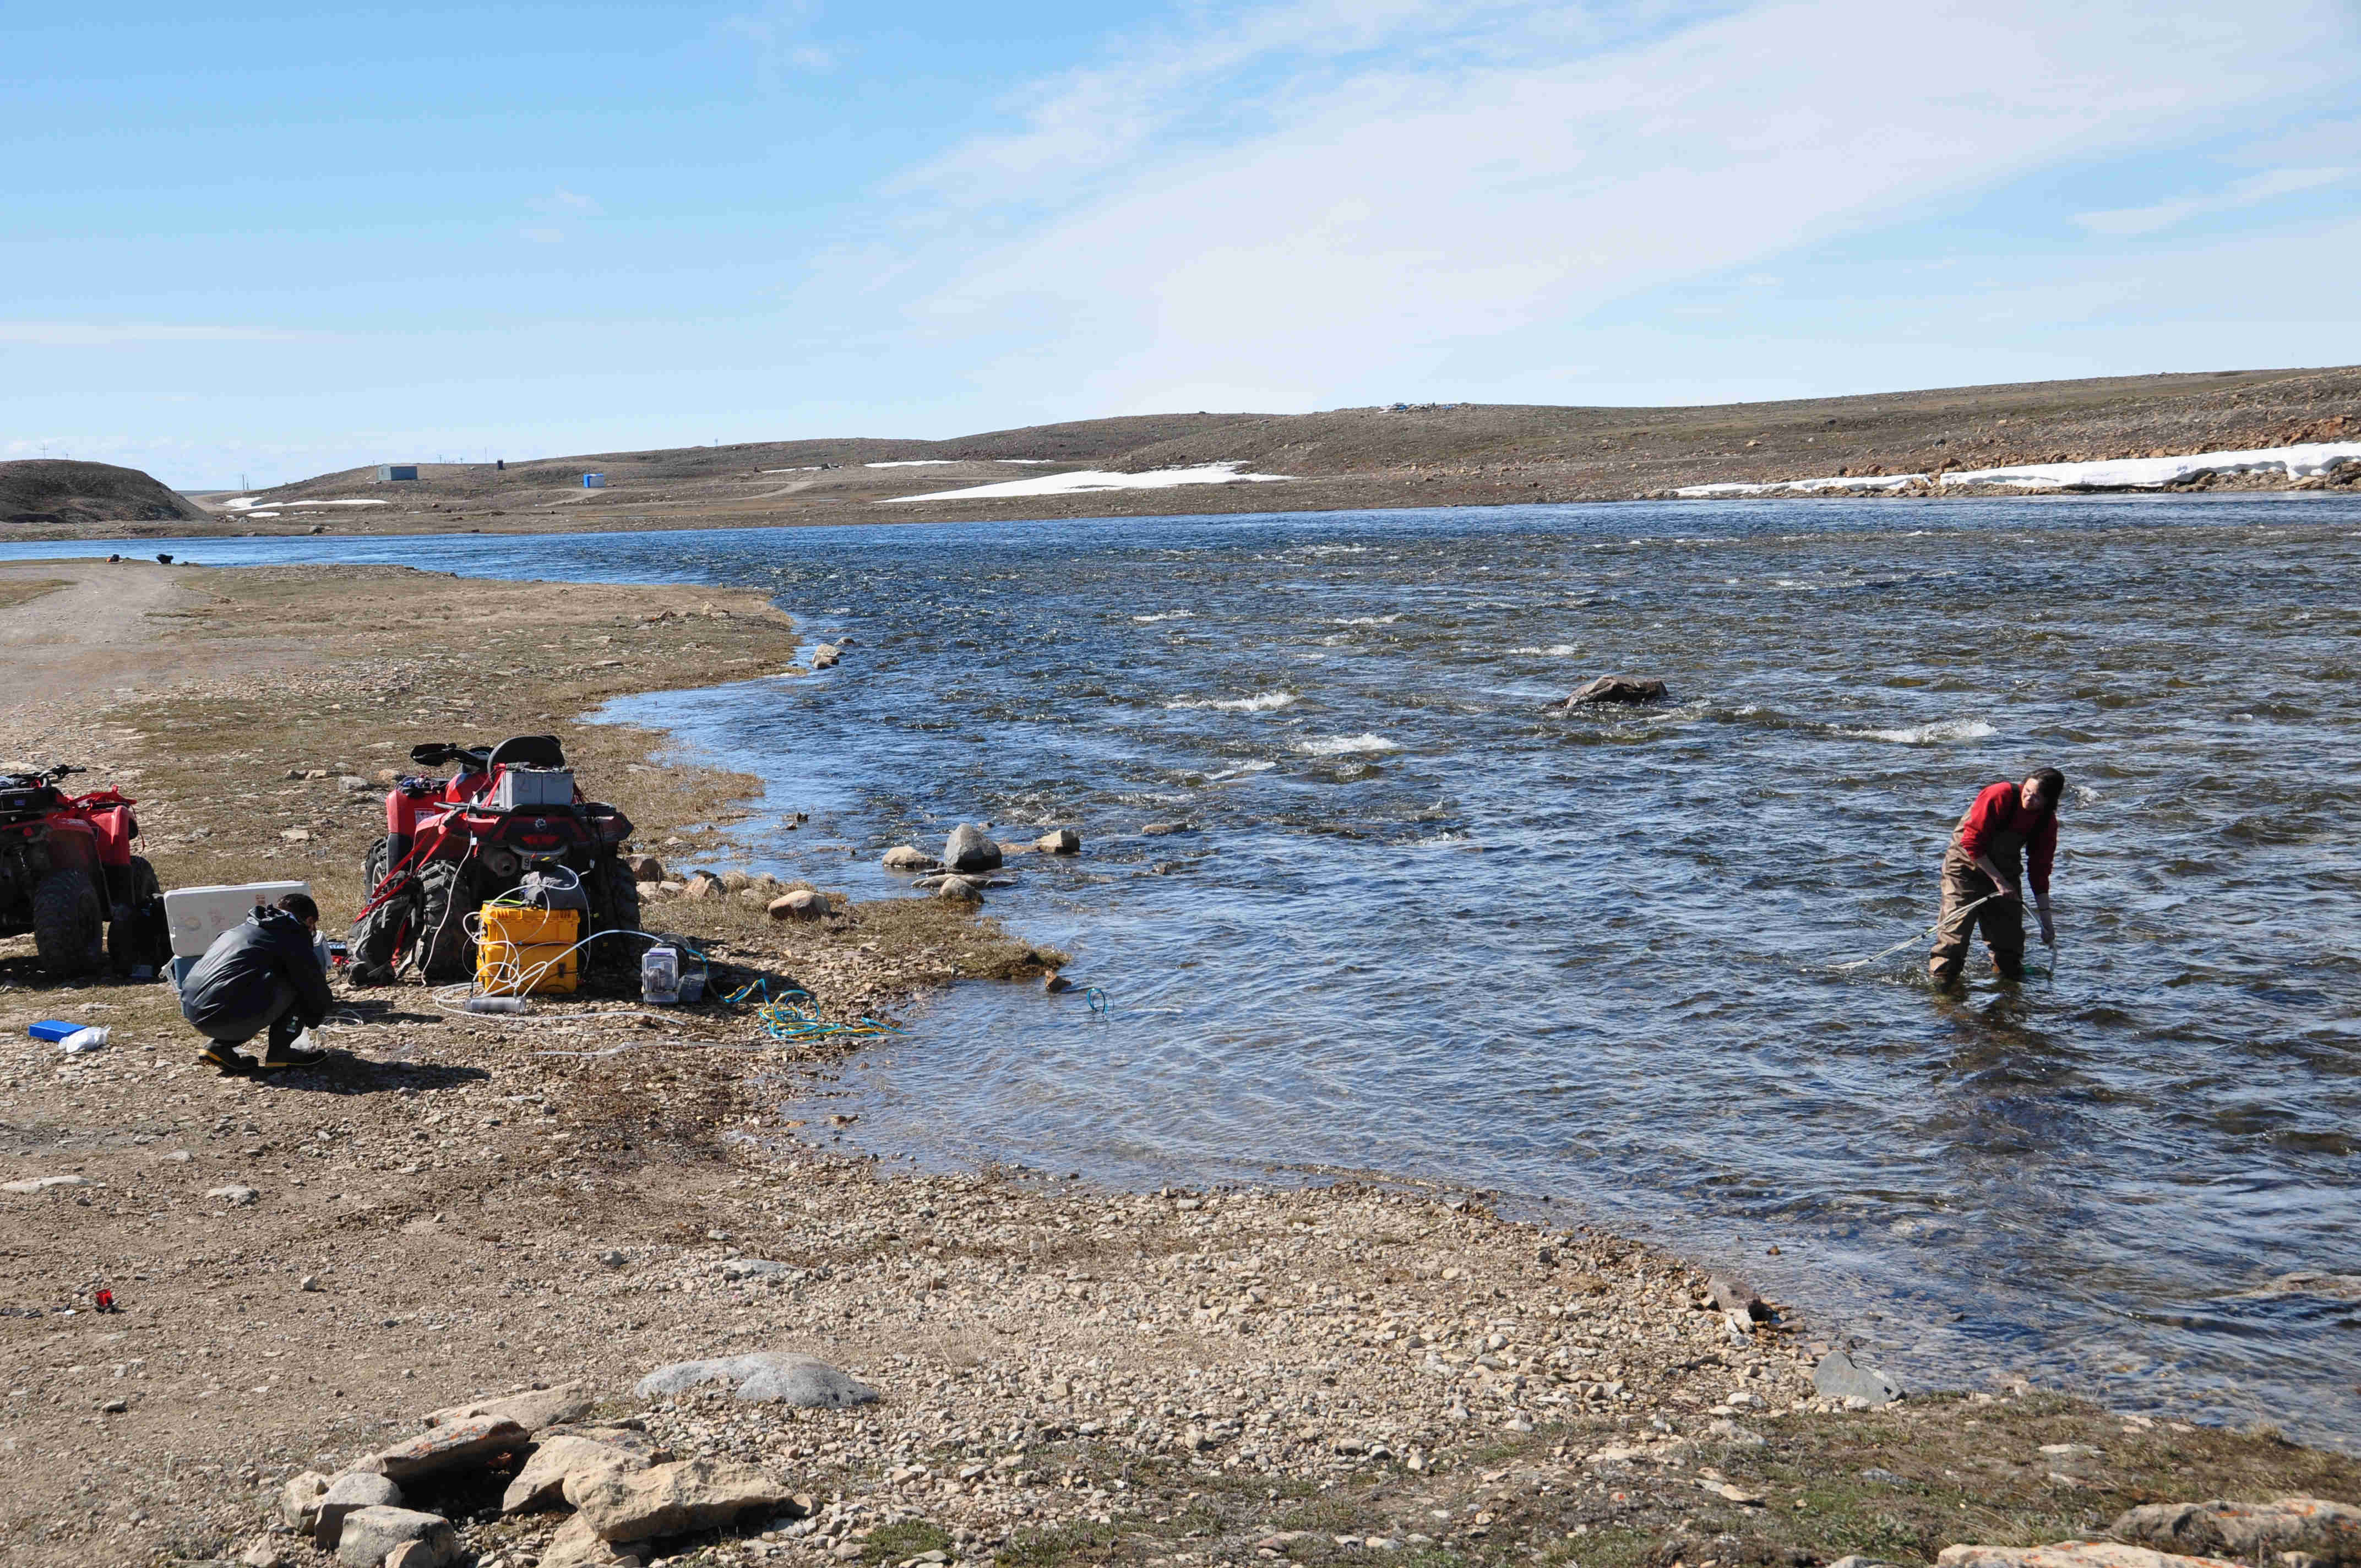 Collecting samples in Cambridge Bay with a shore-pump